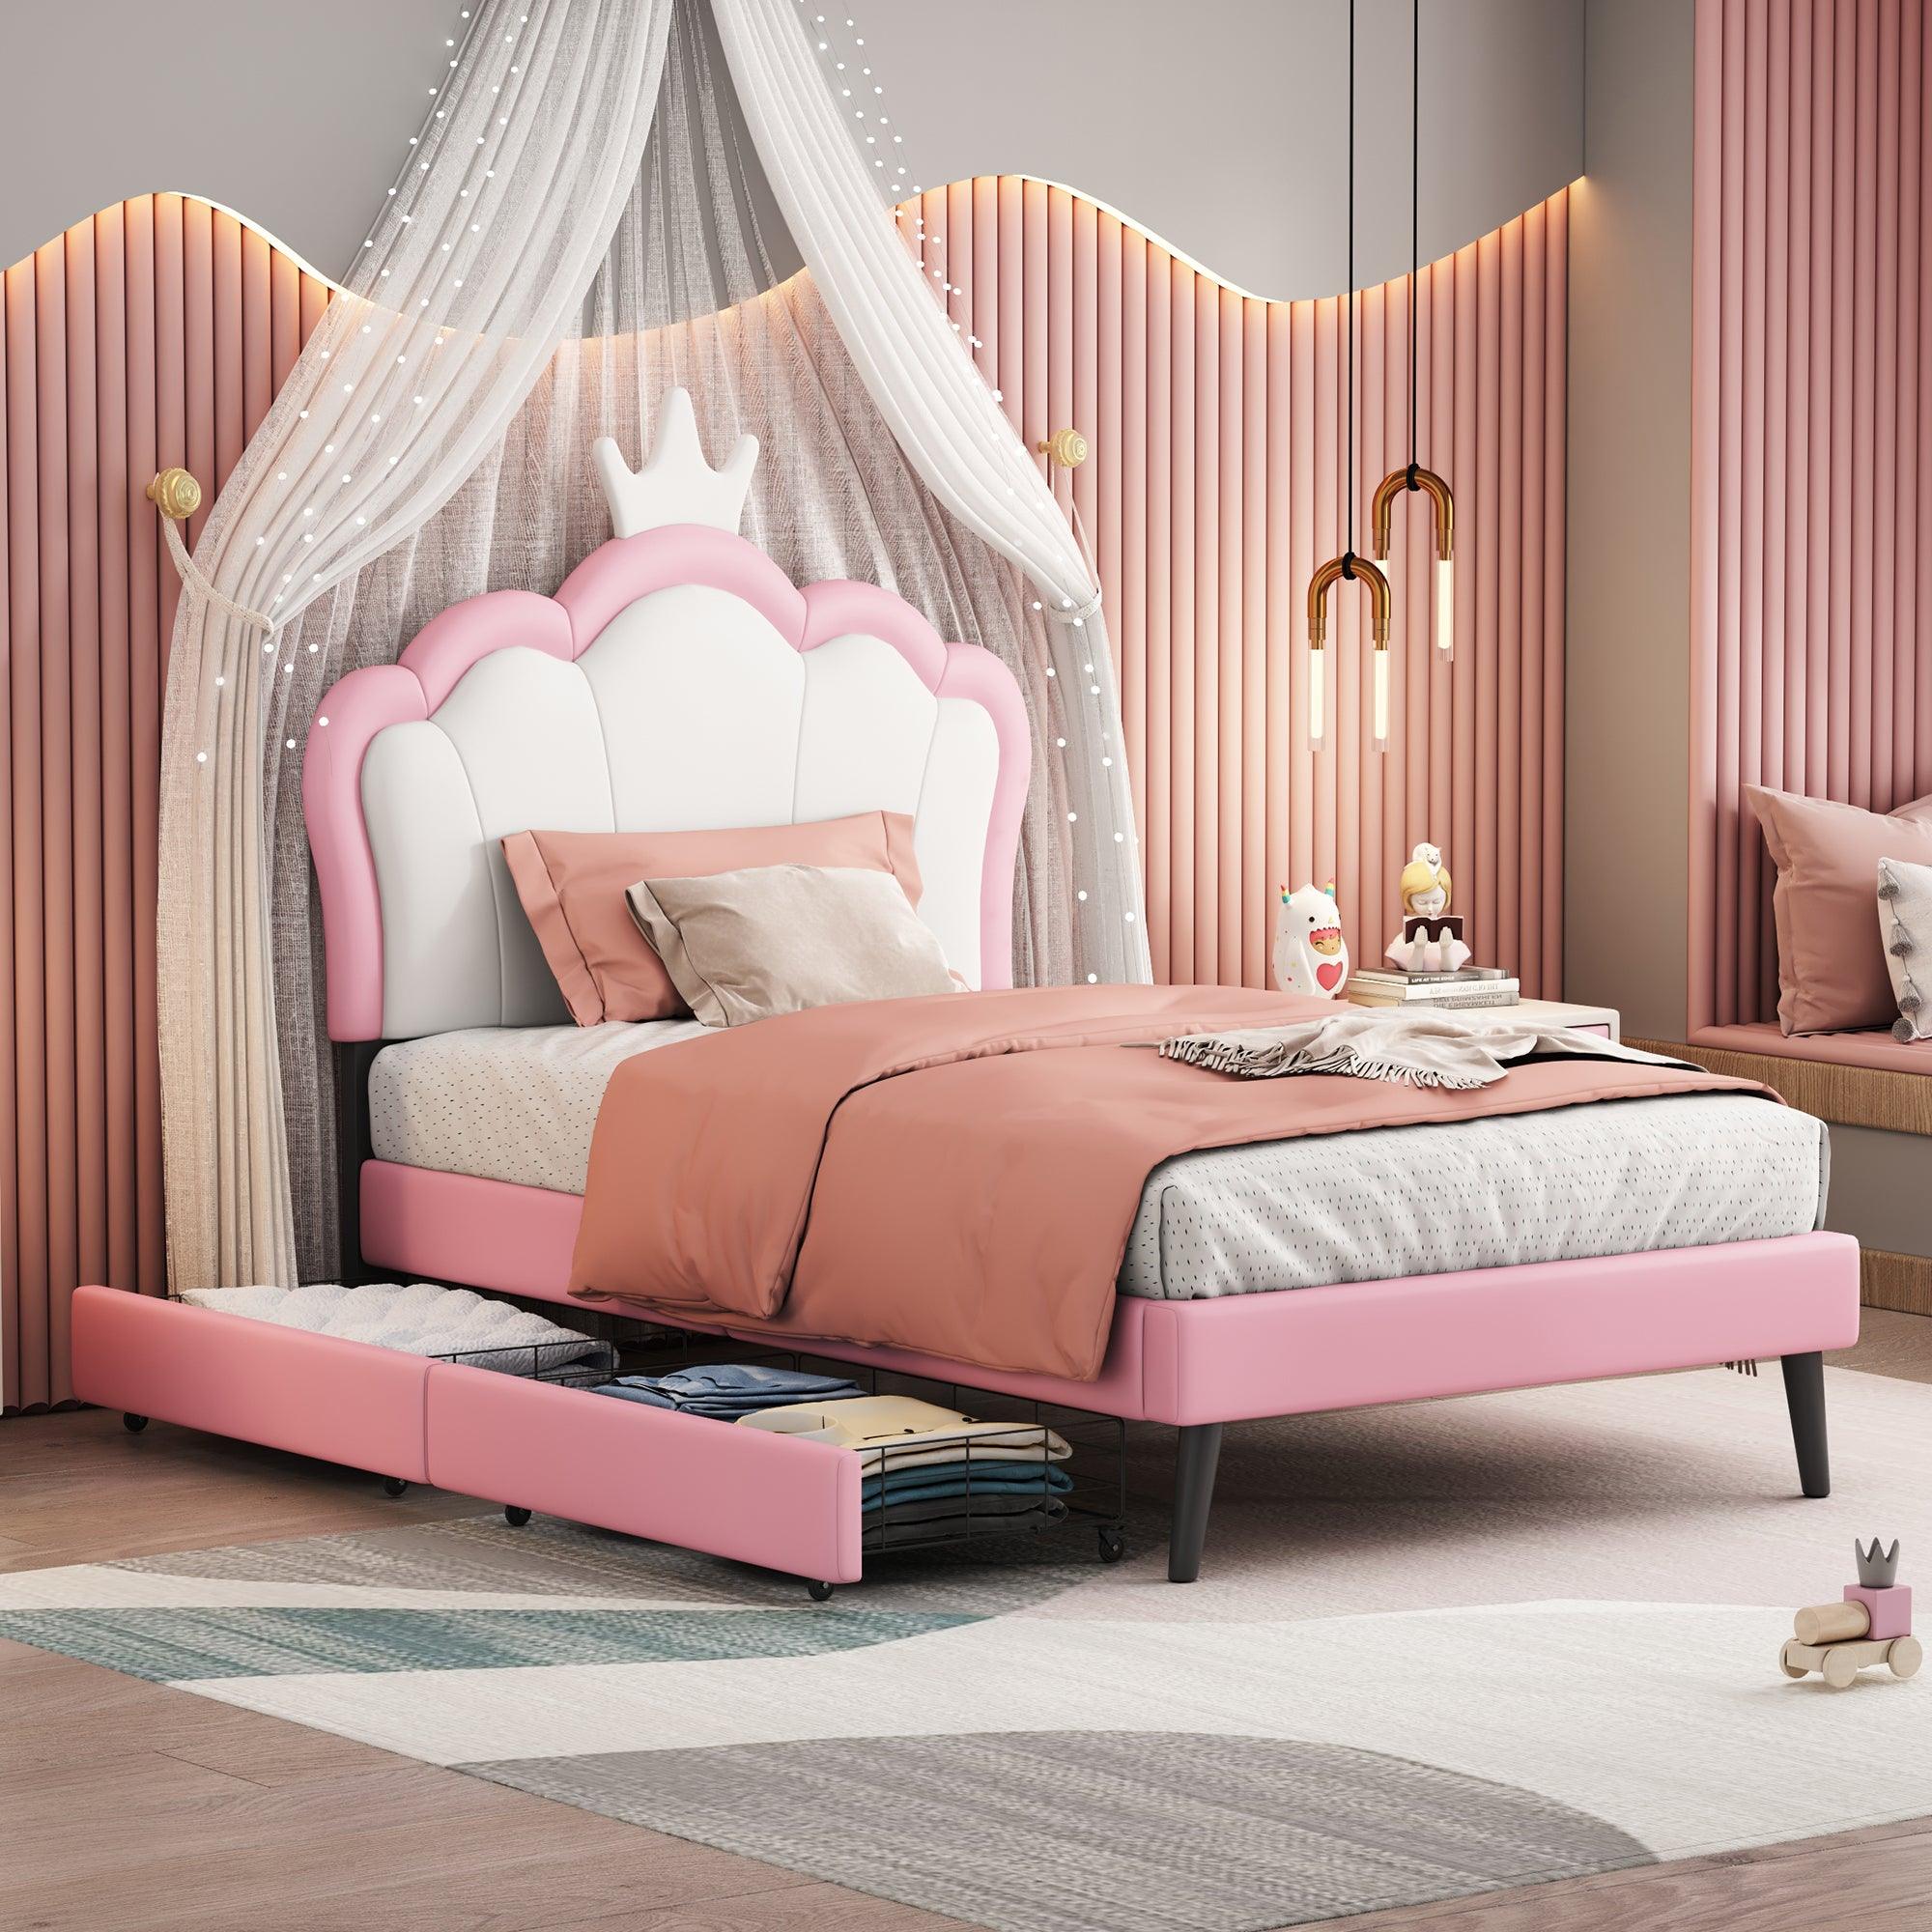 🆓🚛 Twin Size Upholstered Princess Bed With Crown Headboard & 2 Drawers, Twin Size Platform Bed With Headboard & Footboard, White & Pink